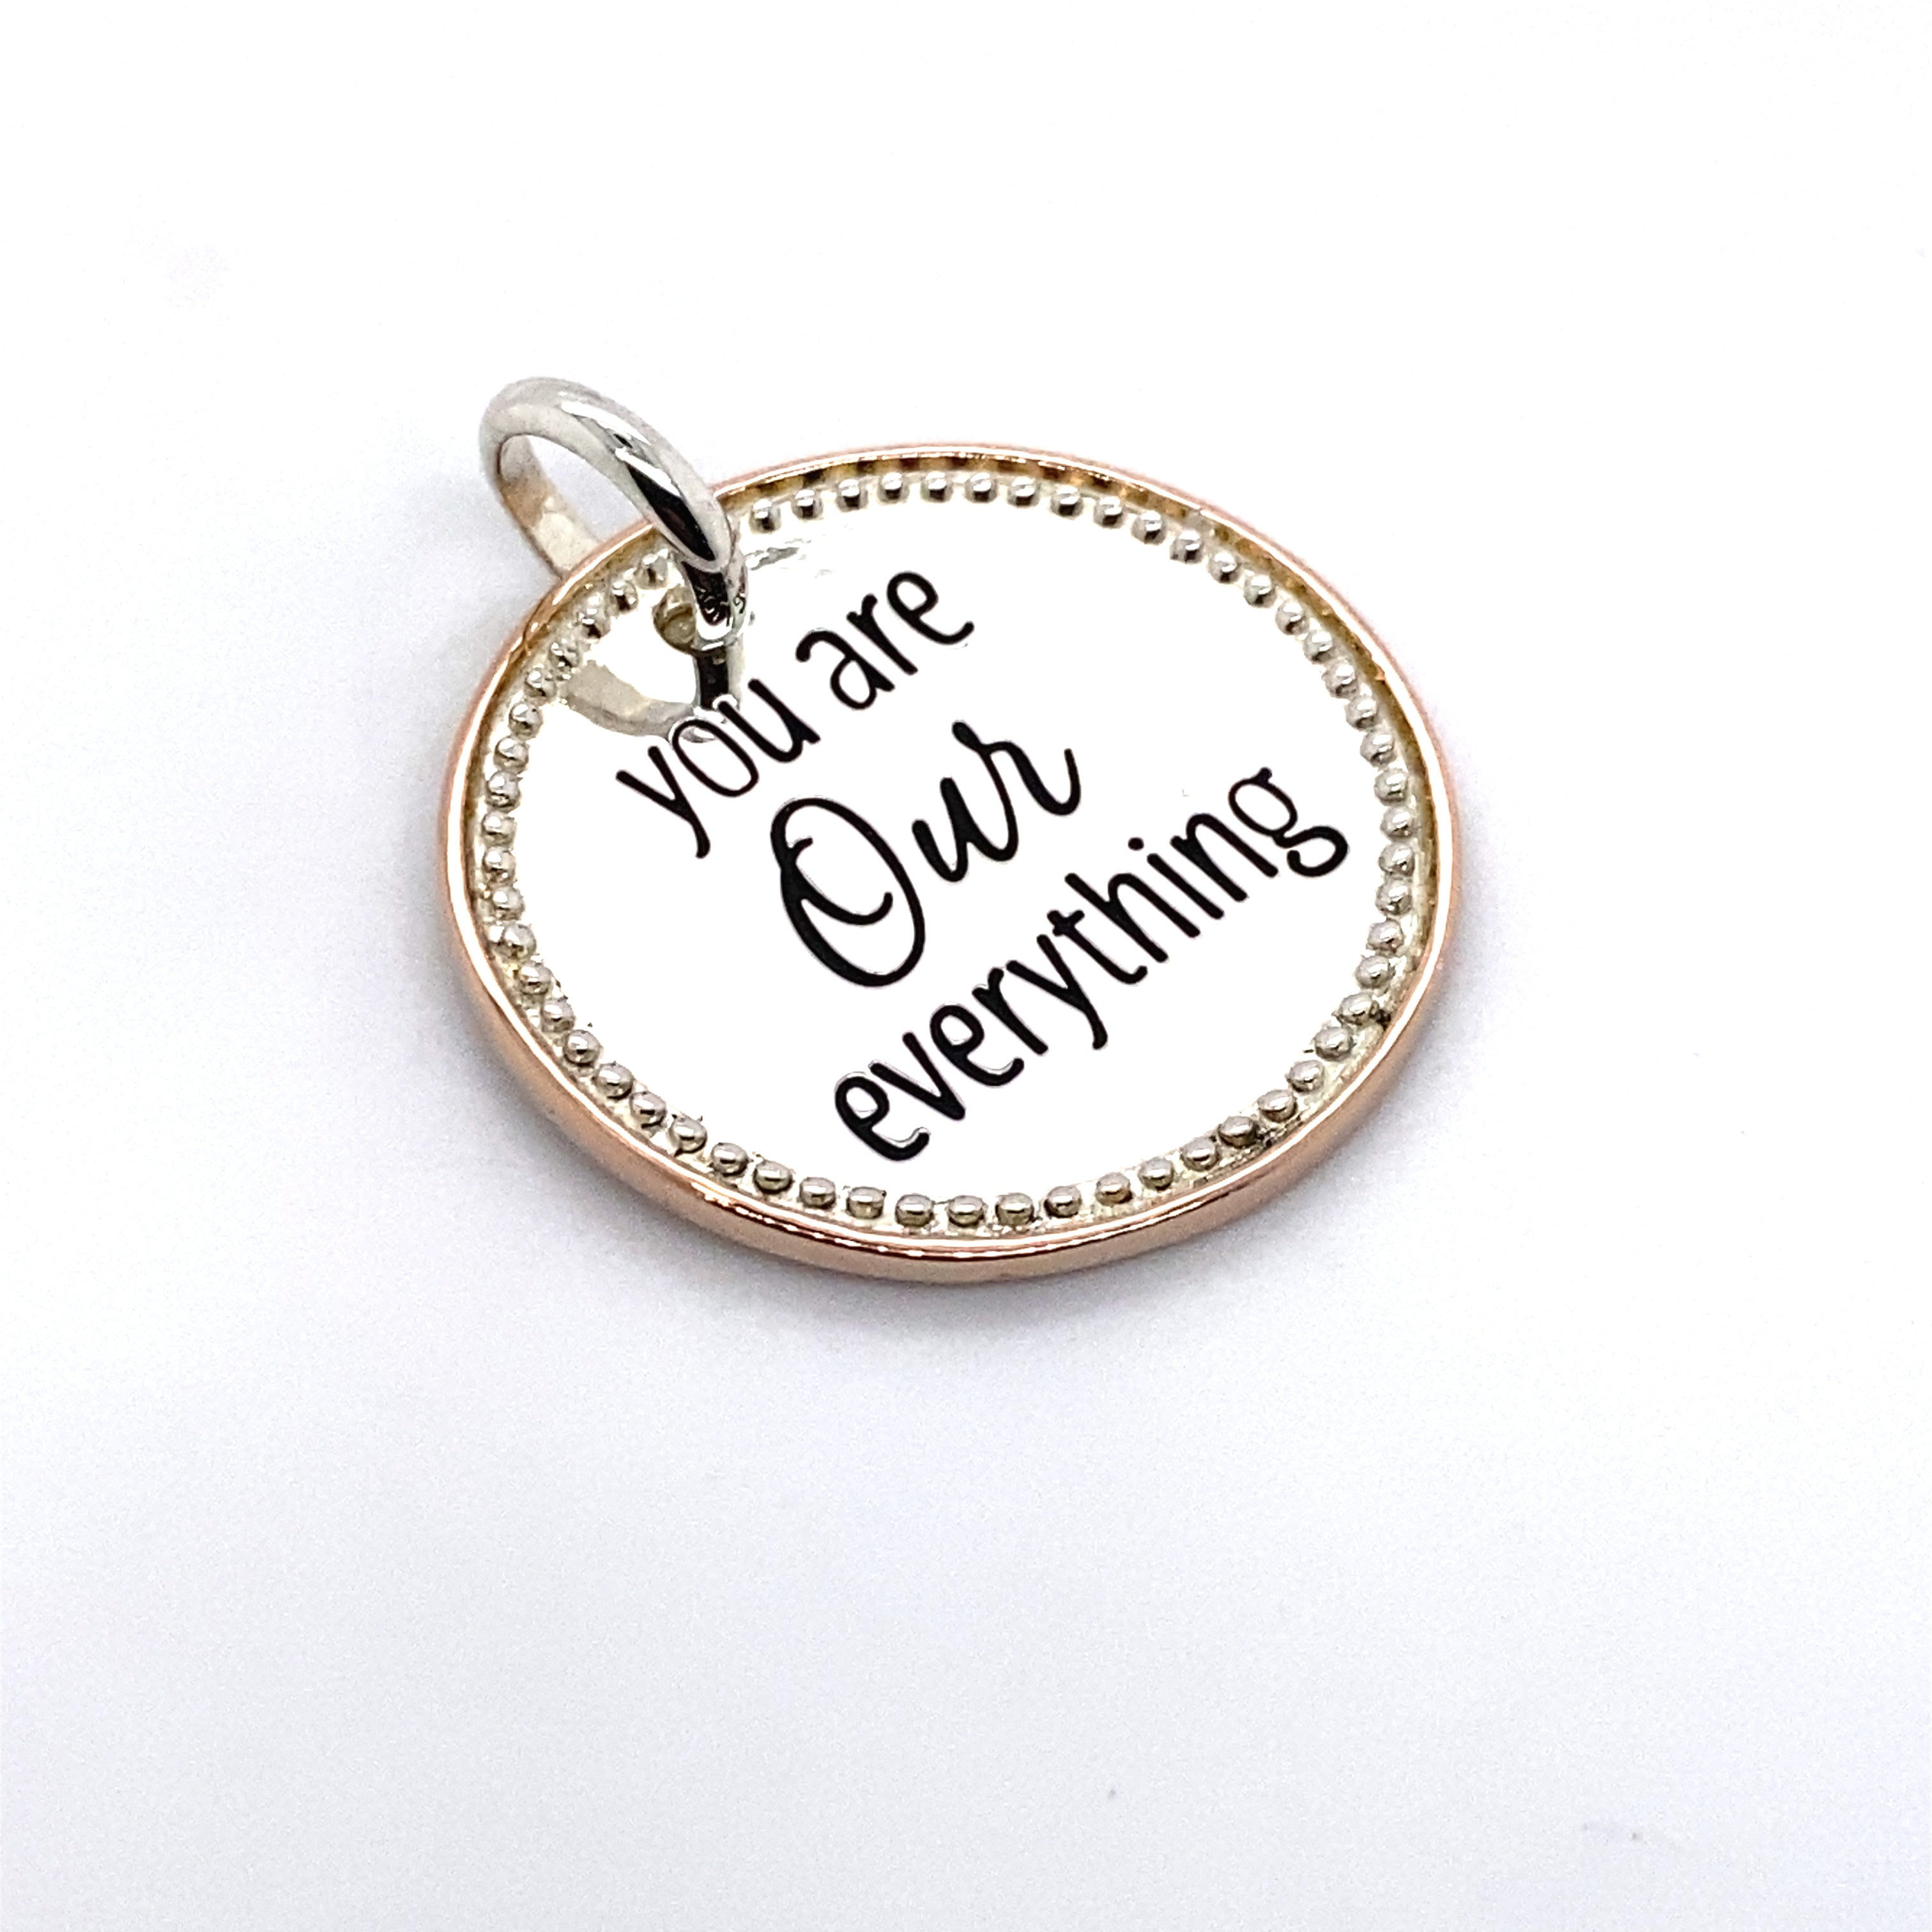 you are our everything pendant charm